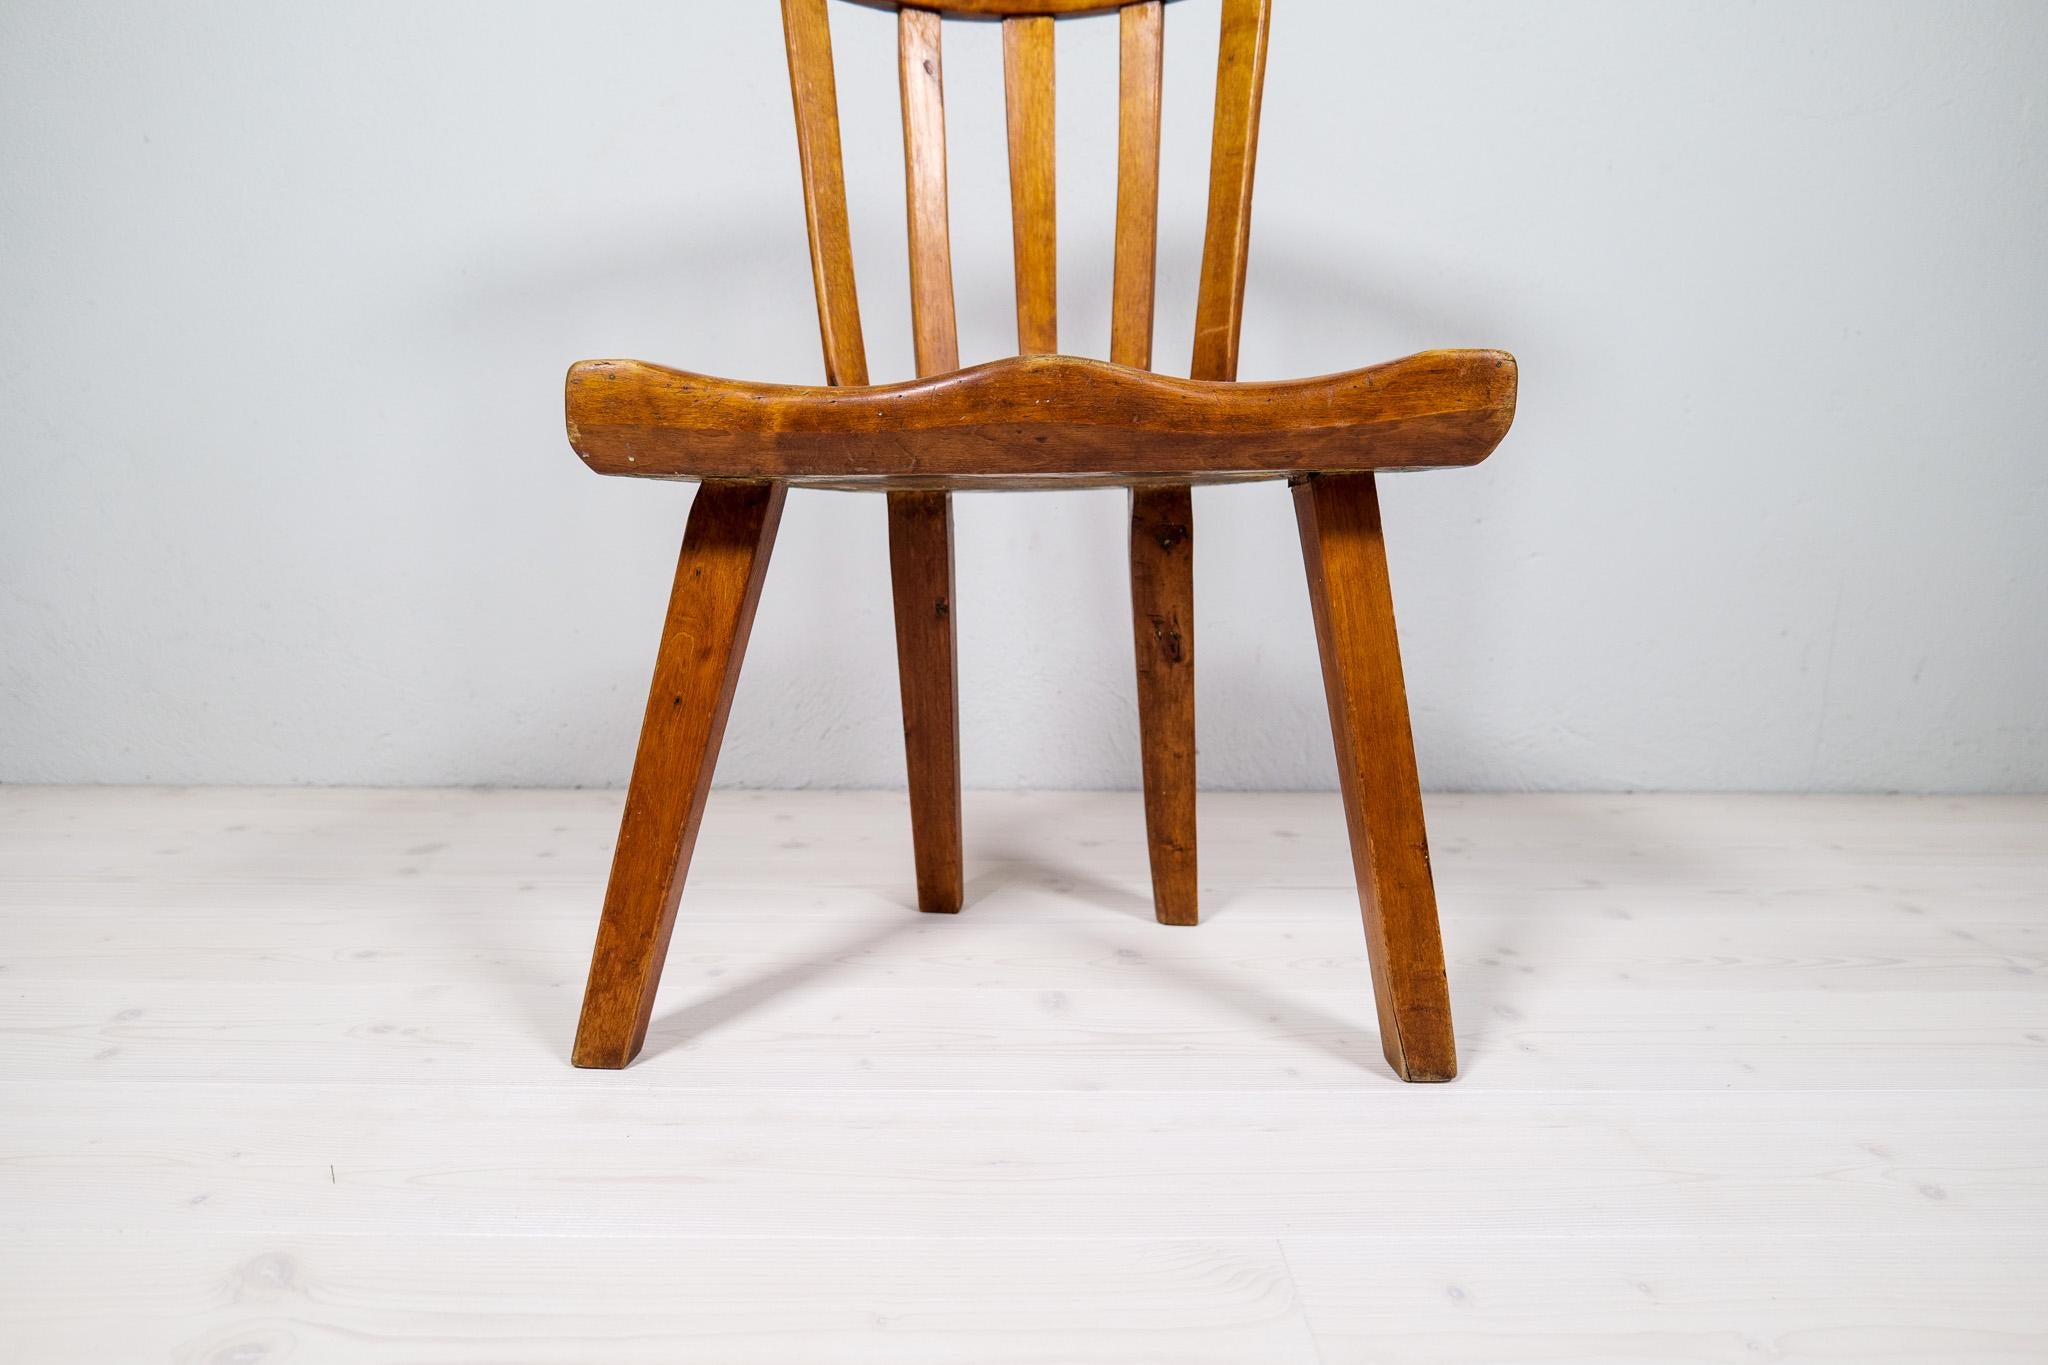 19th Century Swedish Folk Art Chair in Higly Decorative Shapes For Sale 2